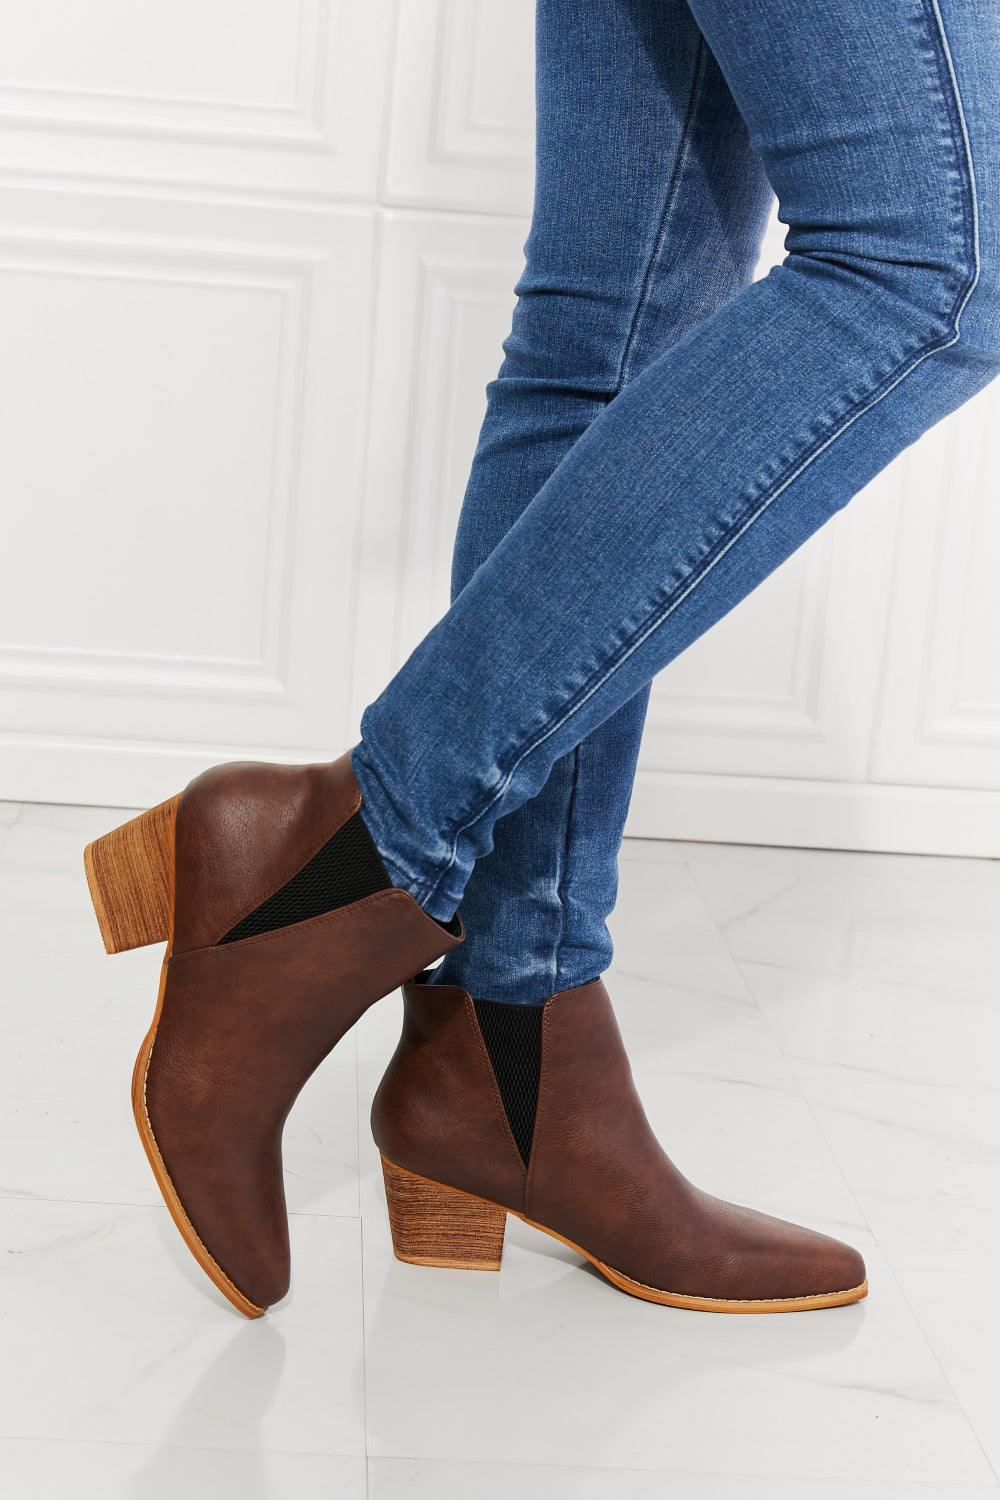 Leona - Point Toe Bootie in Chocolate